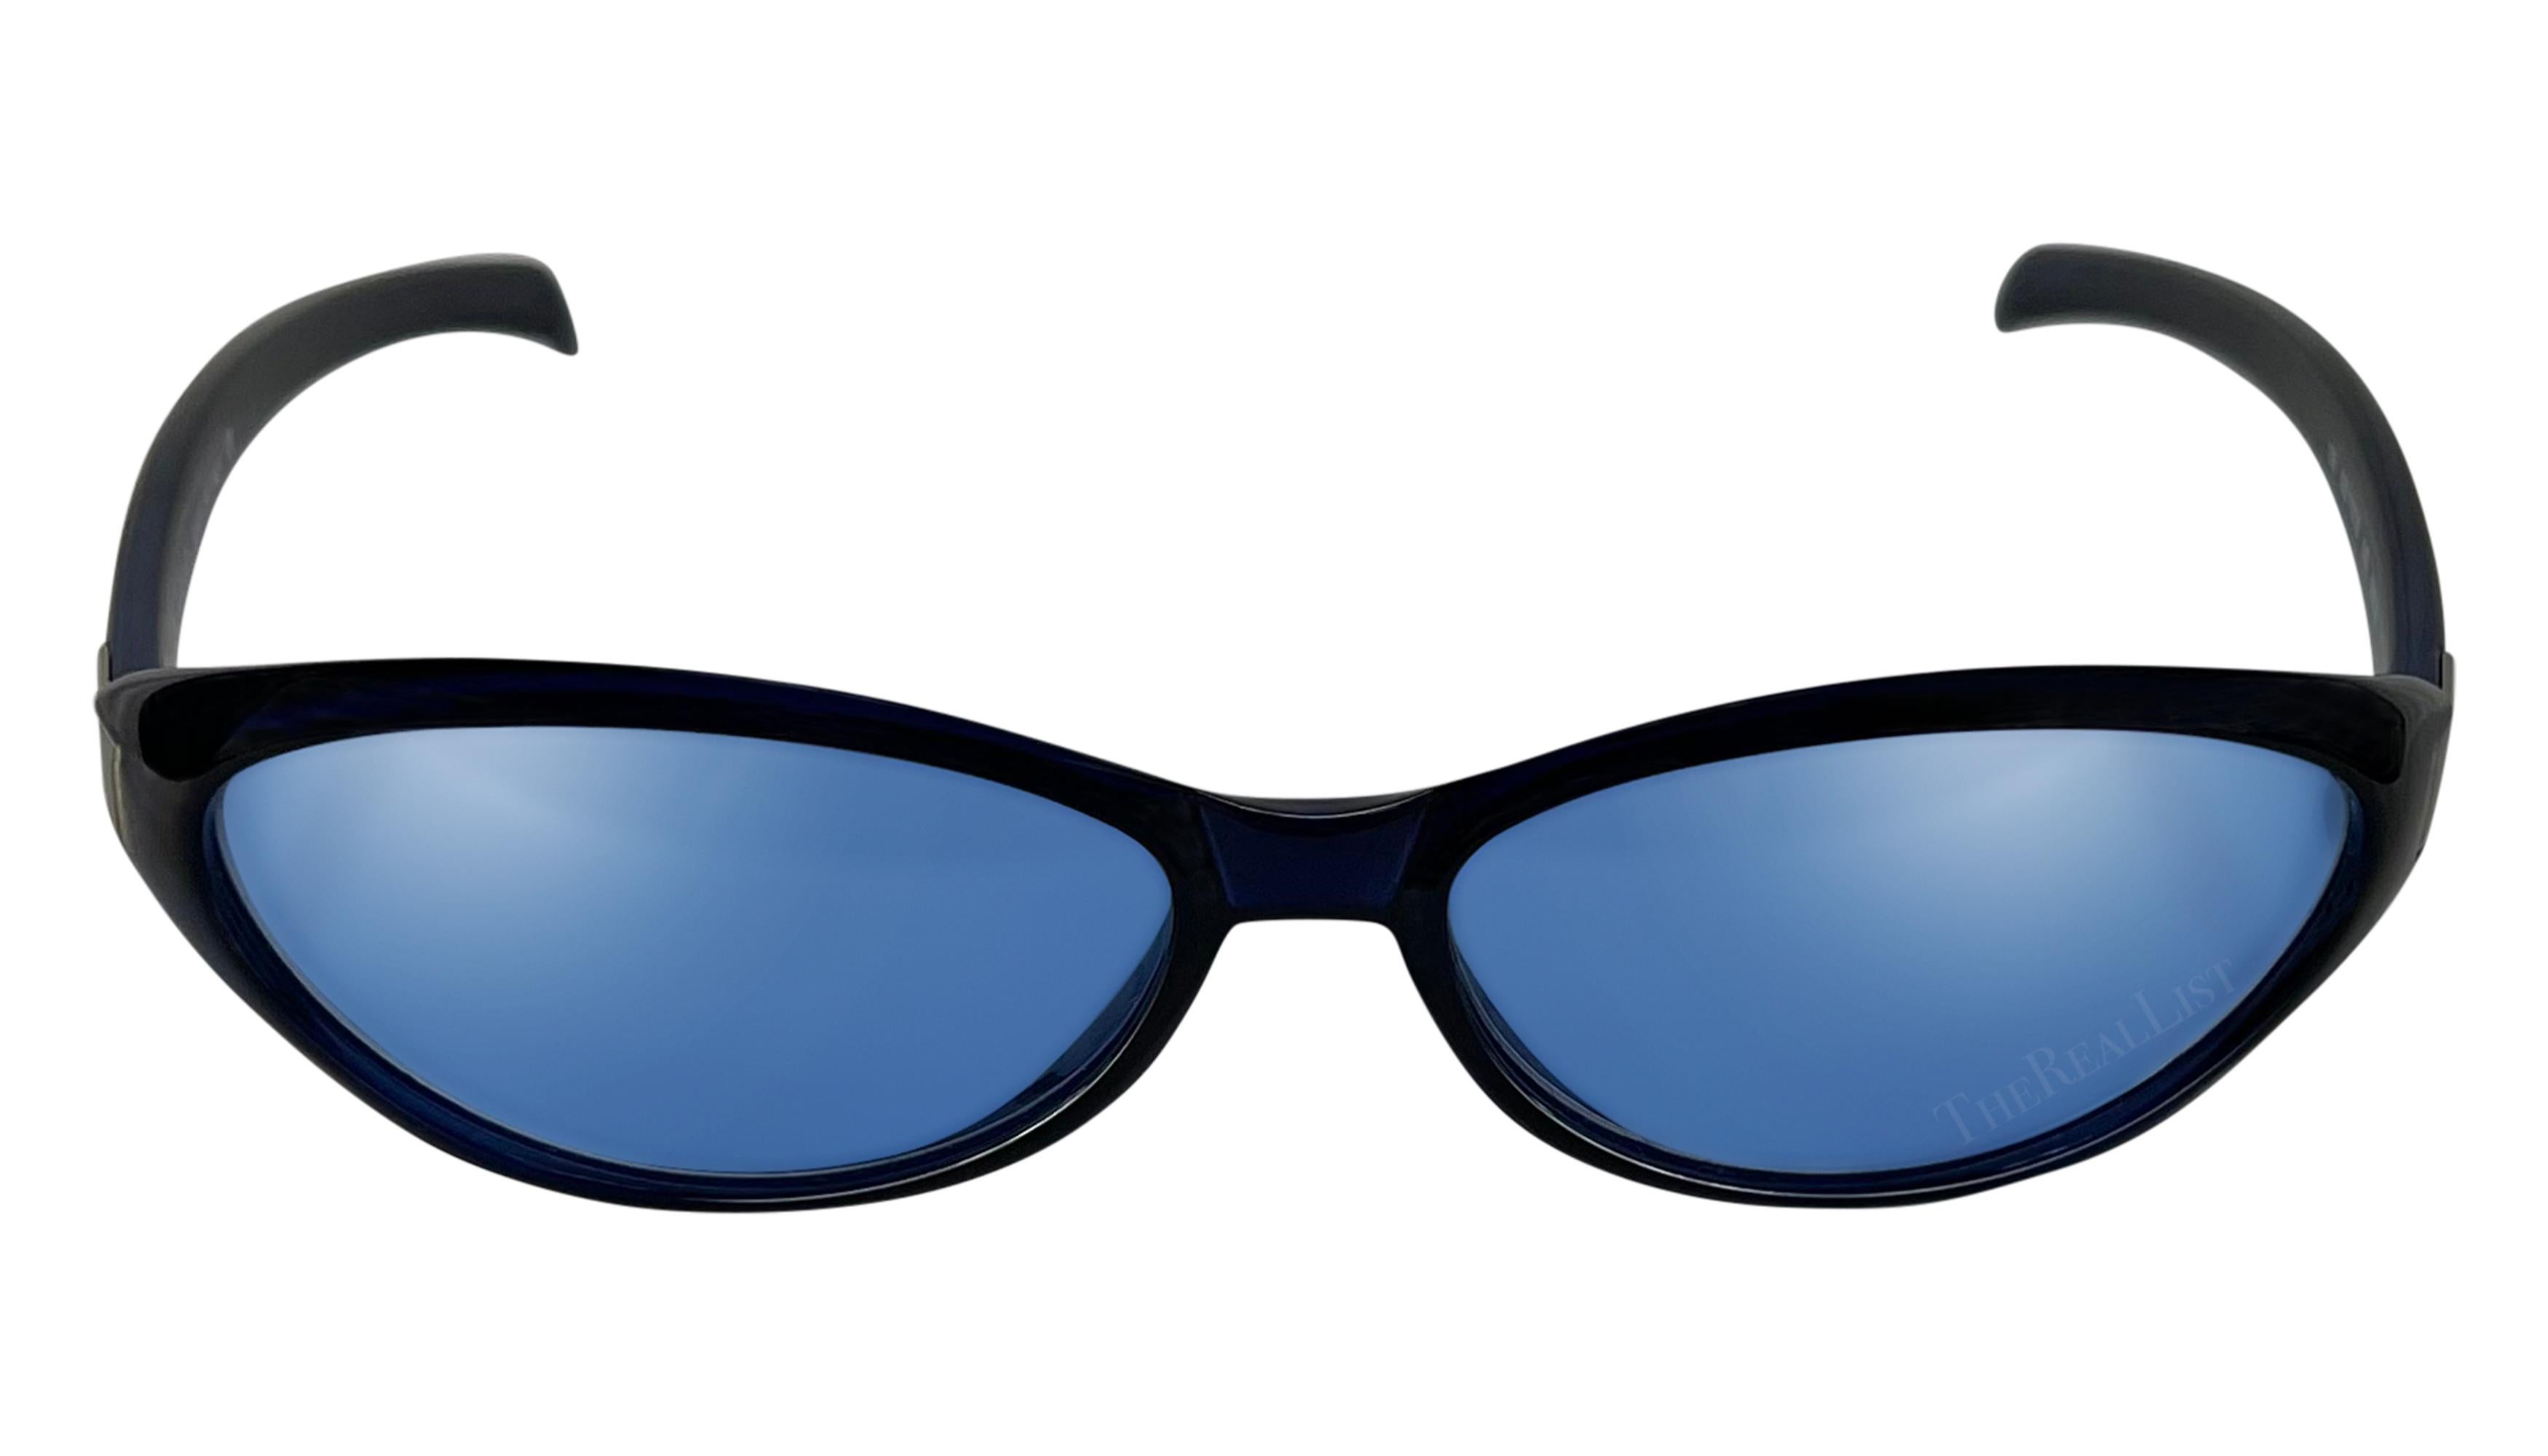 From the late 1990s, these chic sunglasses navy Gucci oval sunglasses, designed by Tom Ford, feature light blue lenses, thin arms, and are made complete with Gucci branded metal accents on either arm. 

Approximate Measurements-
Frame Height: